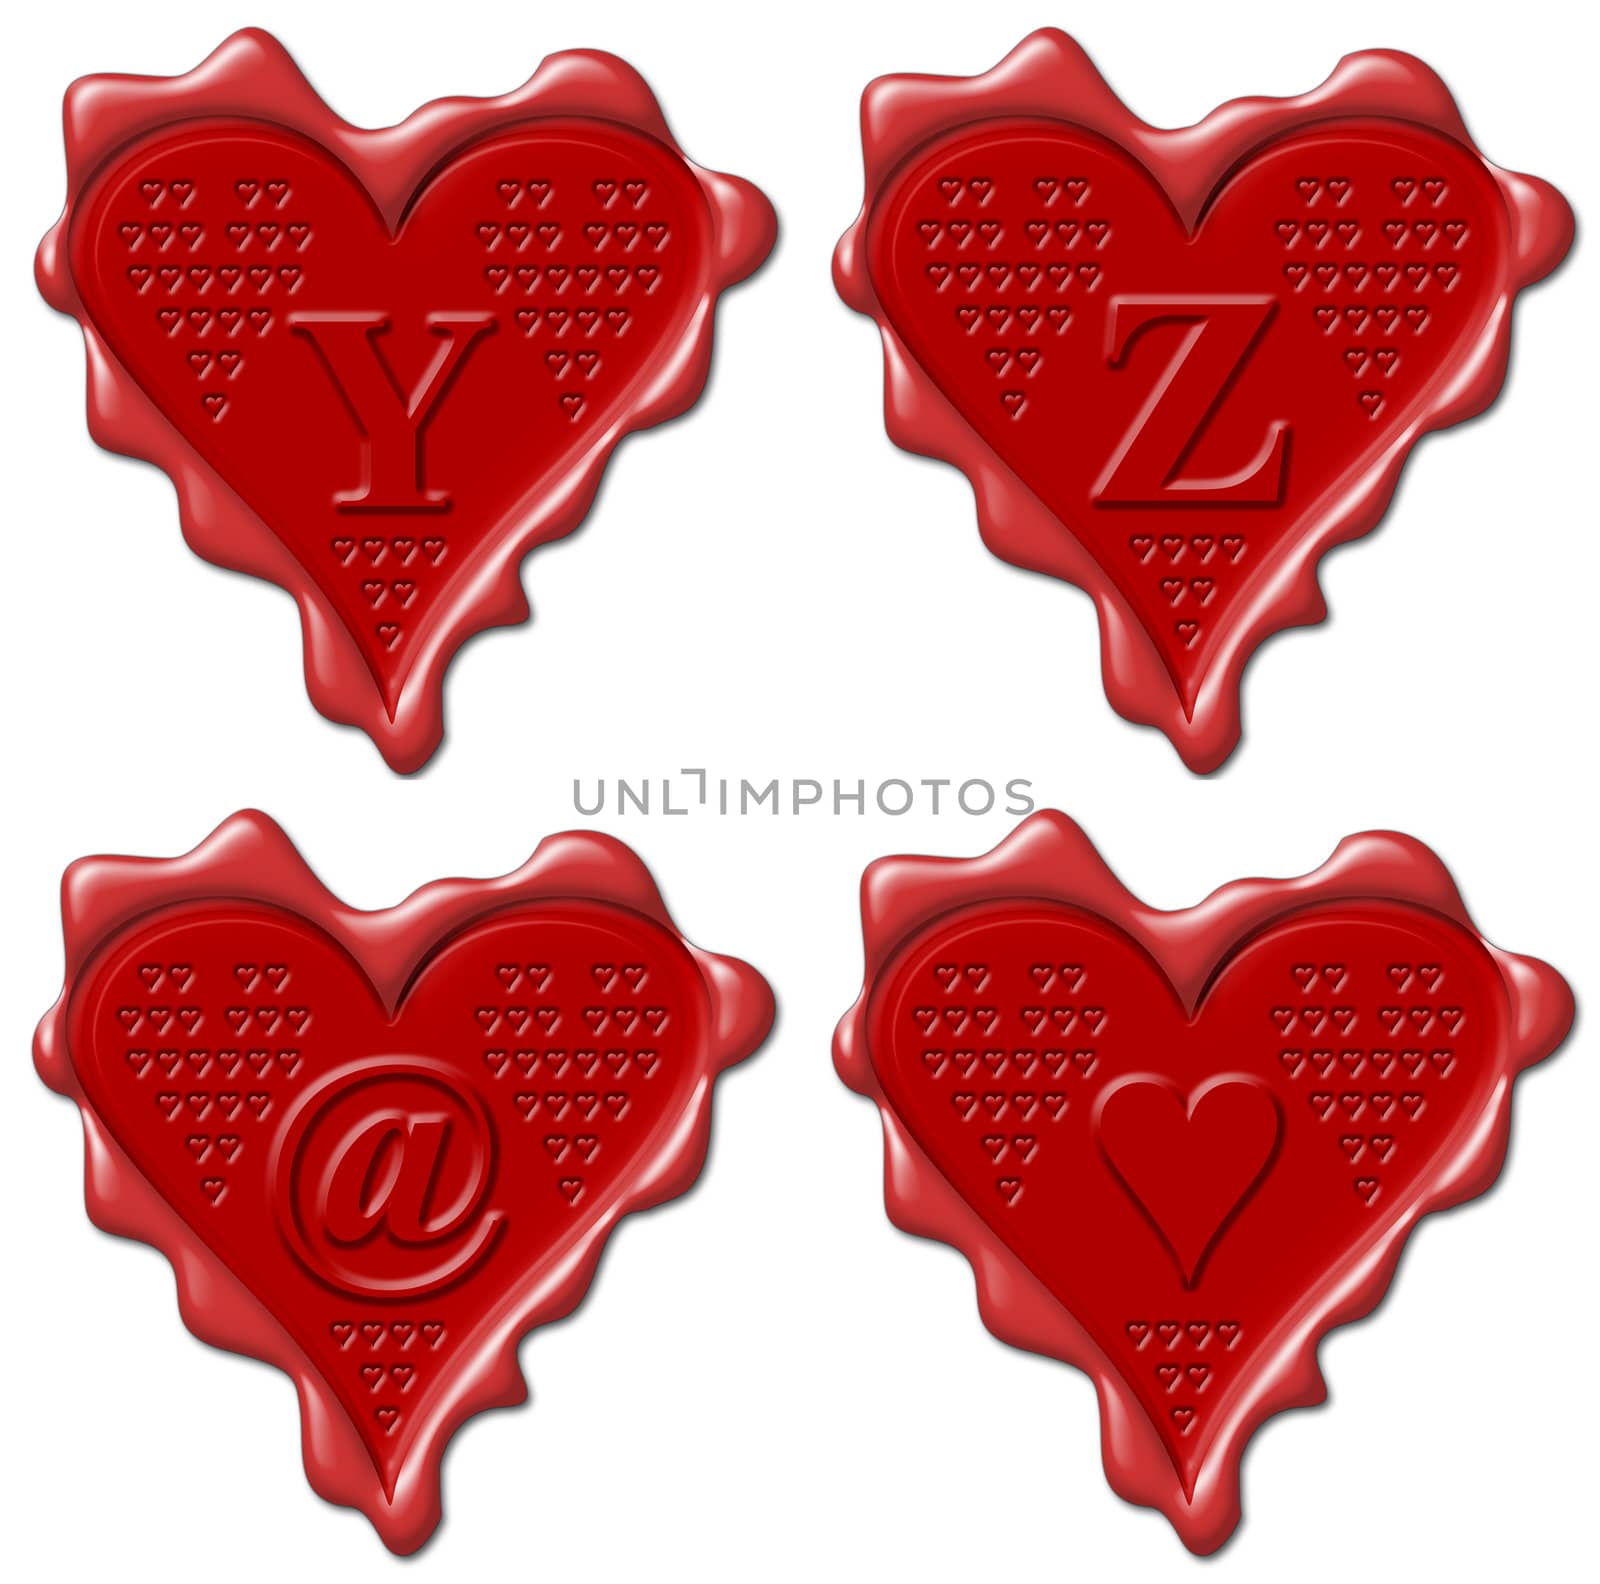 Y, Z, heart - red wax seal collection